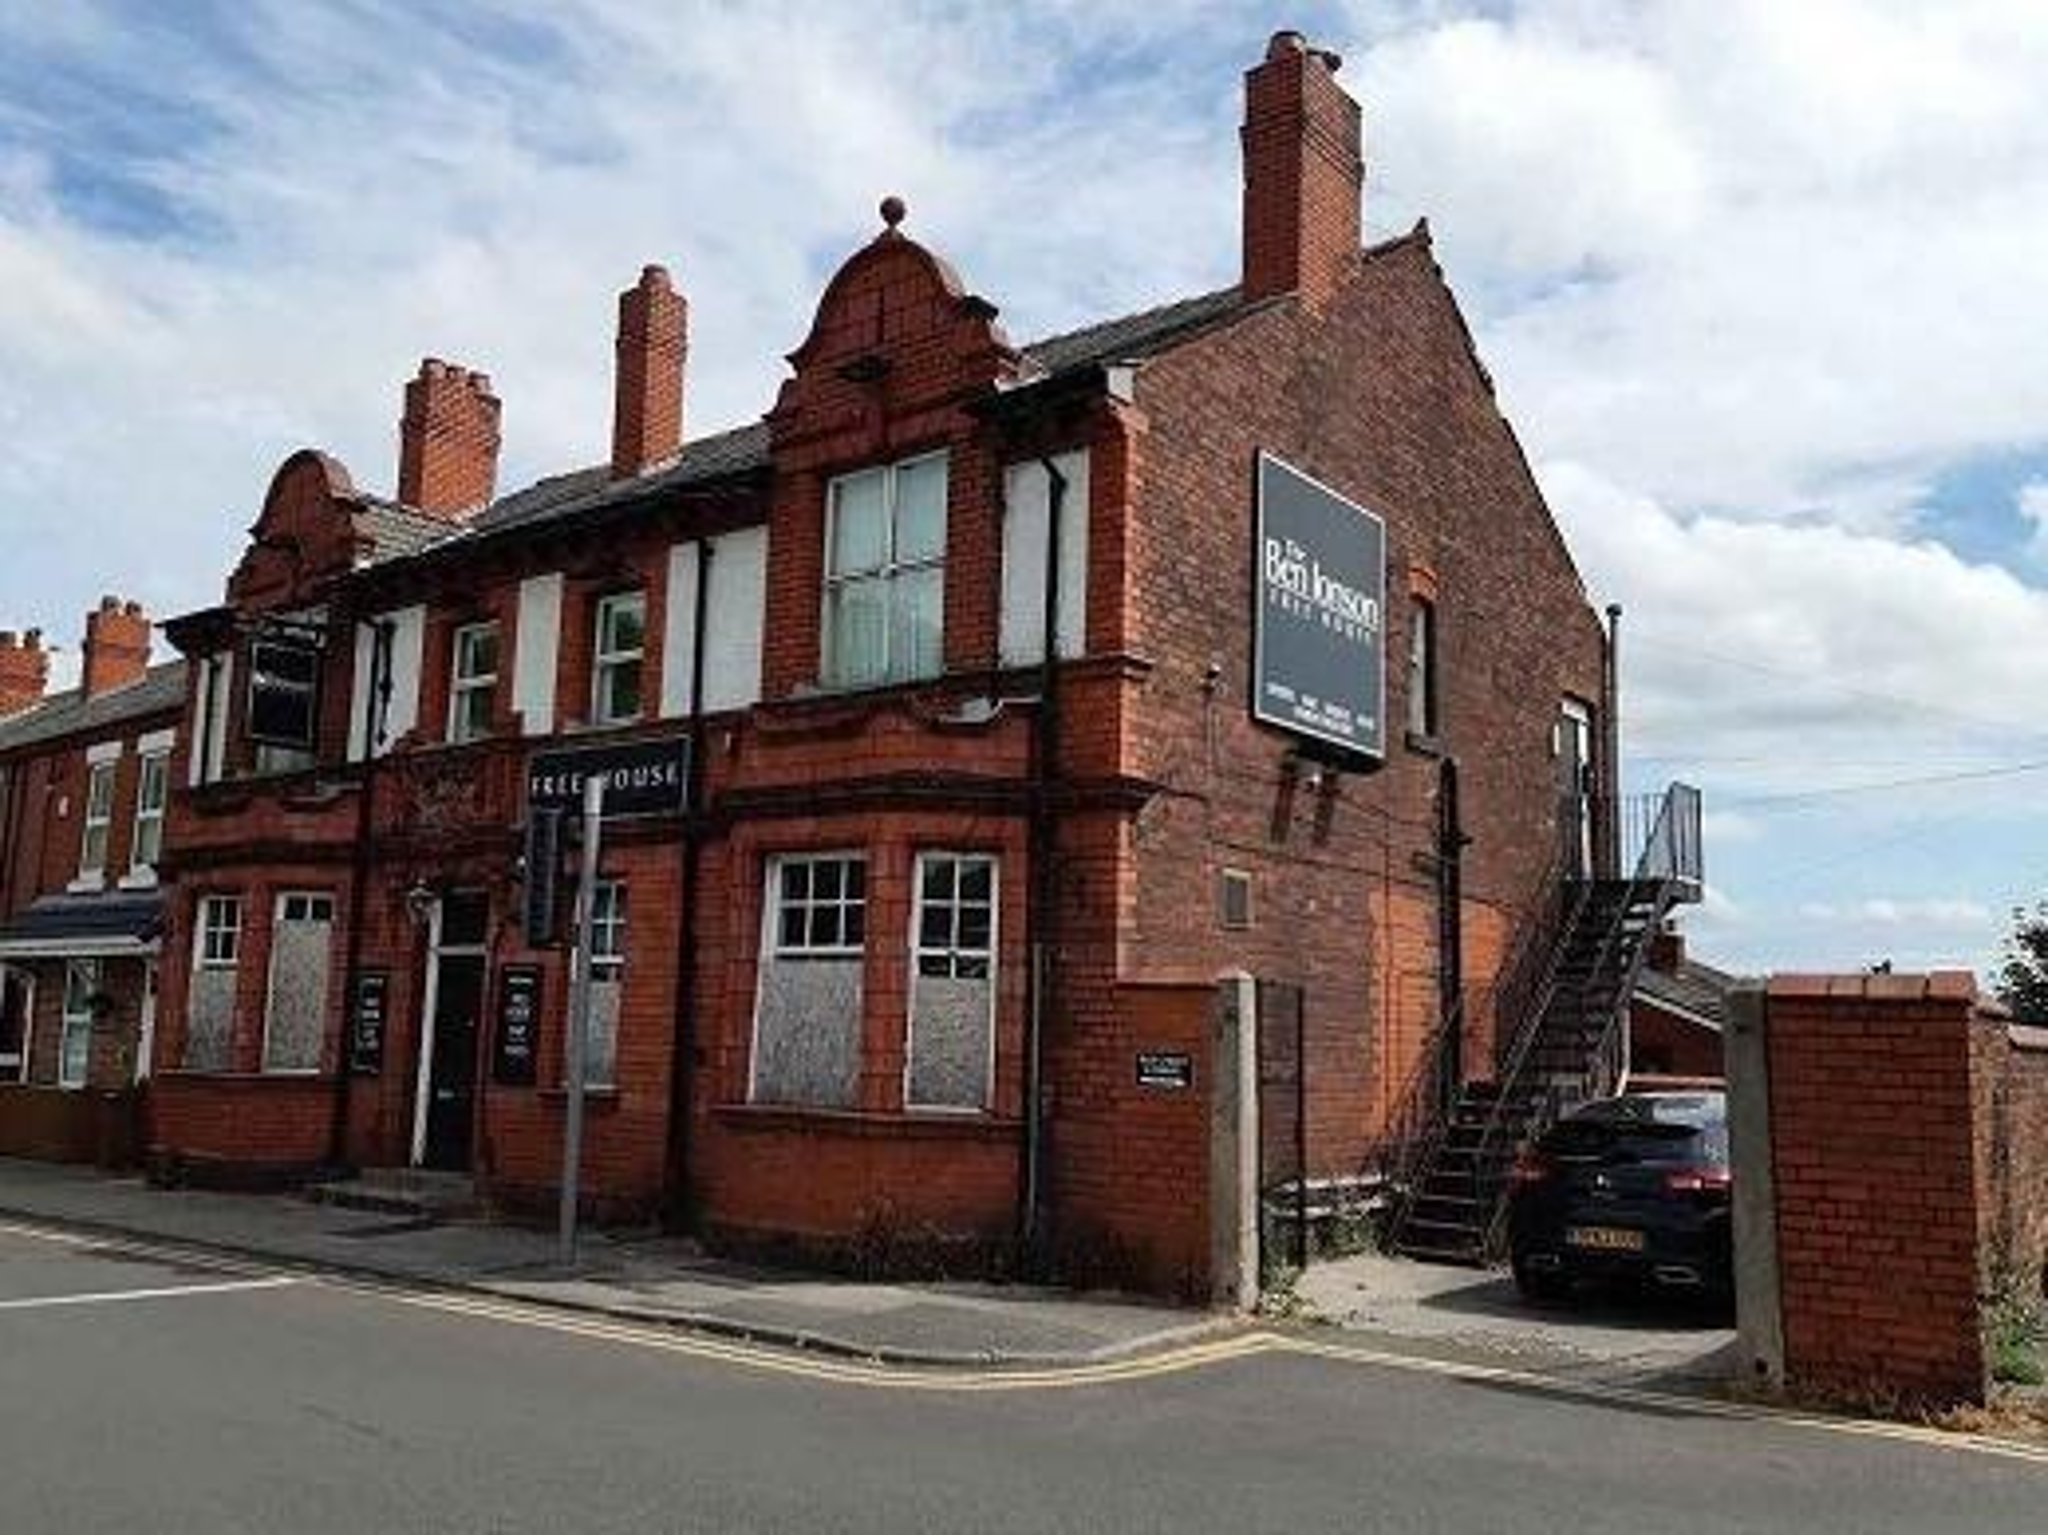 Ben Jonson pub up for sale and could be converted into homes